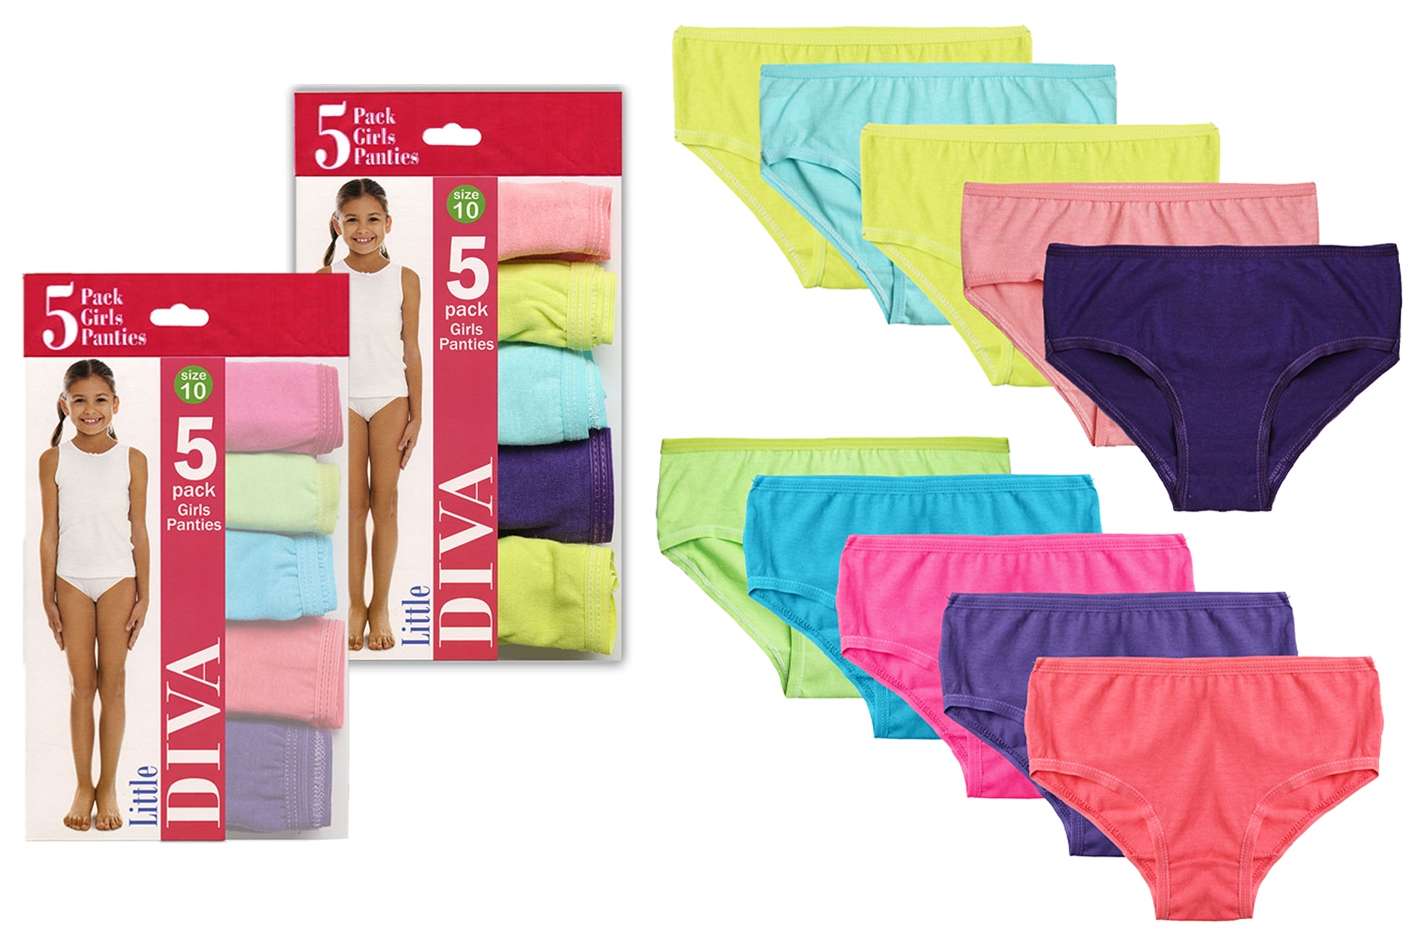 Fruit of the Loom Girls Assorted Cotton Brief Underwear, 14 Pack Panties  Sizes 4 - 14